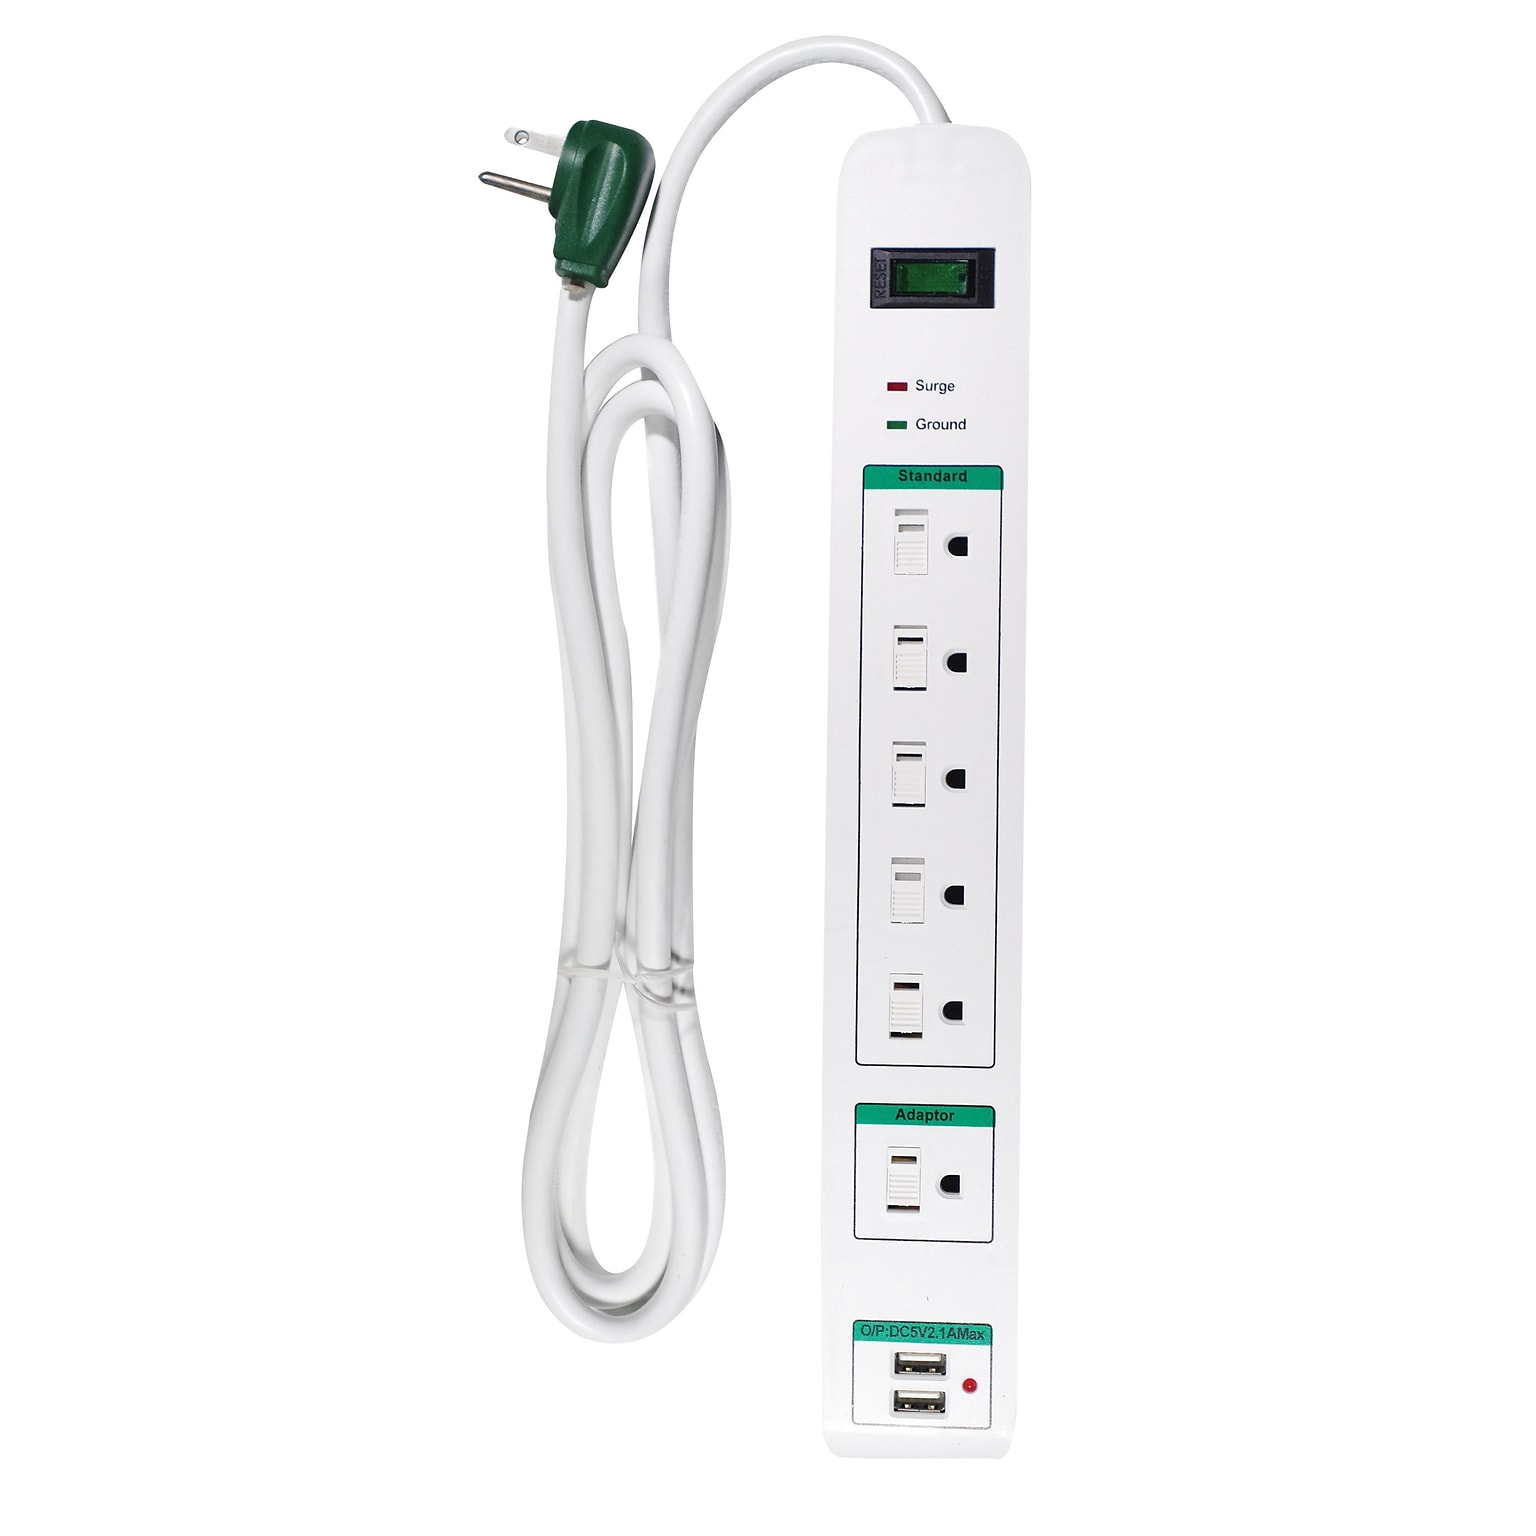 GoGreen Power 6 Surge Protector, 6 Outlet, White (GG-16326USB)